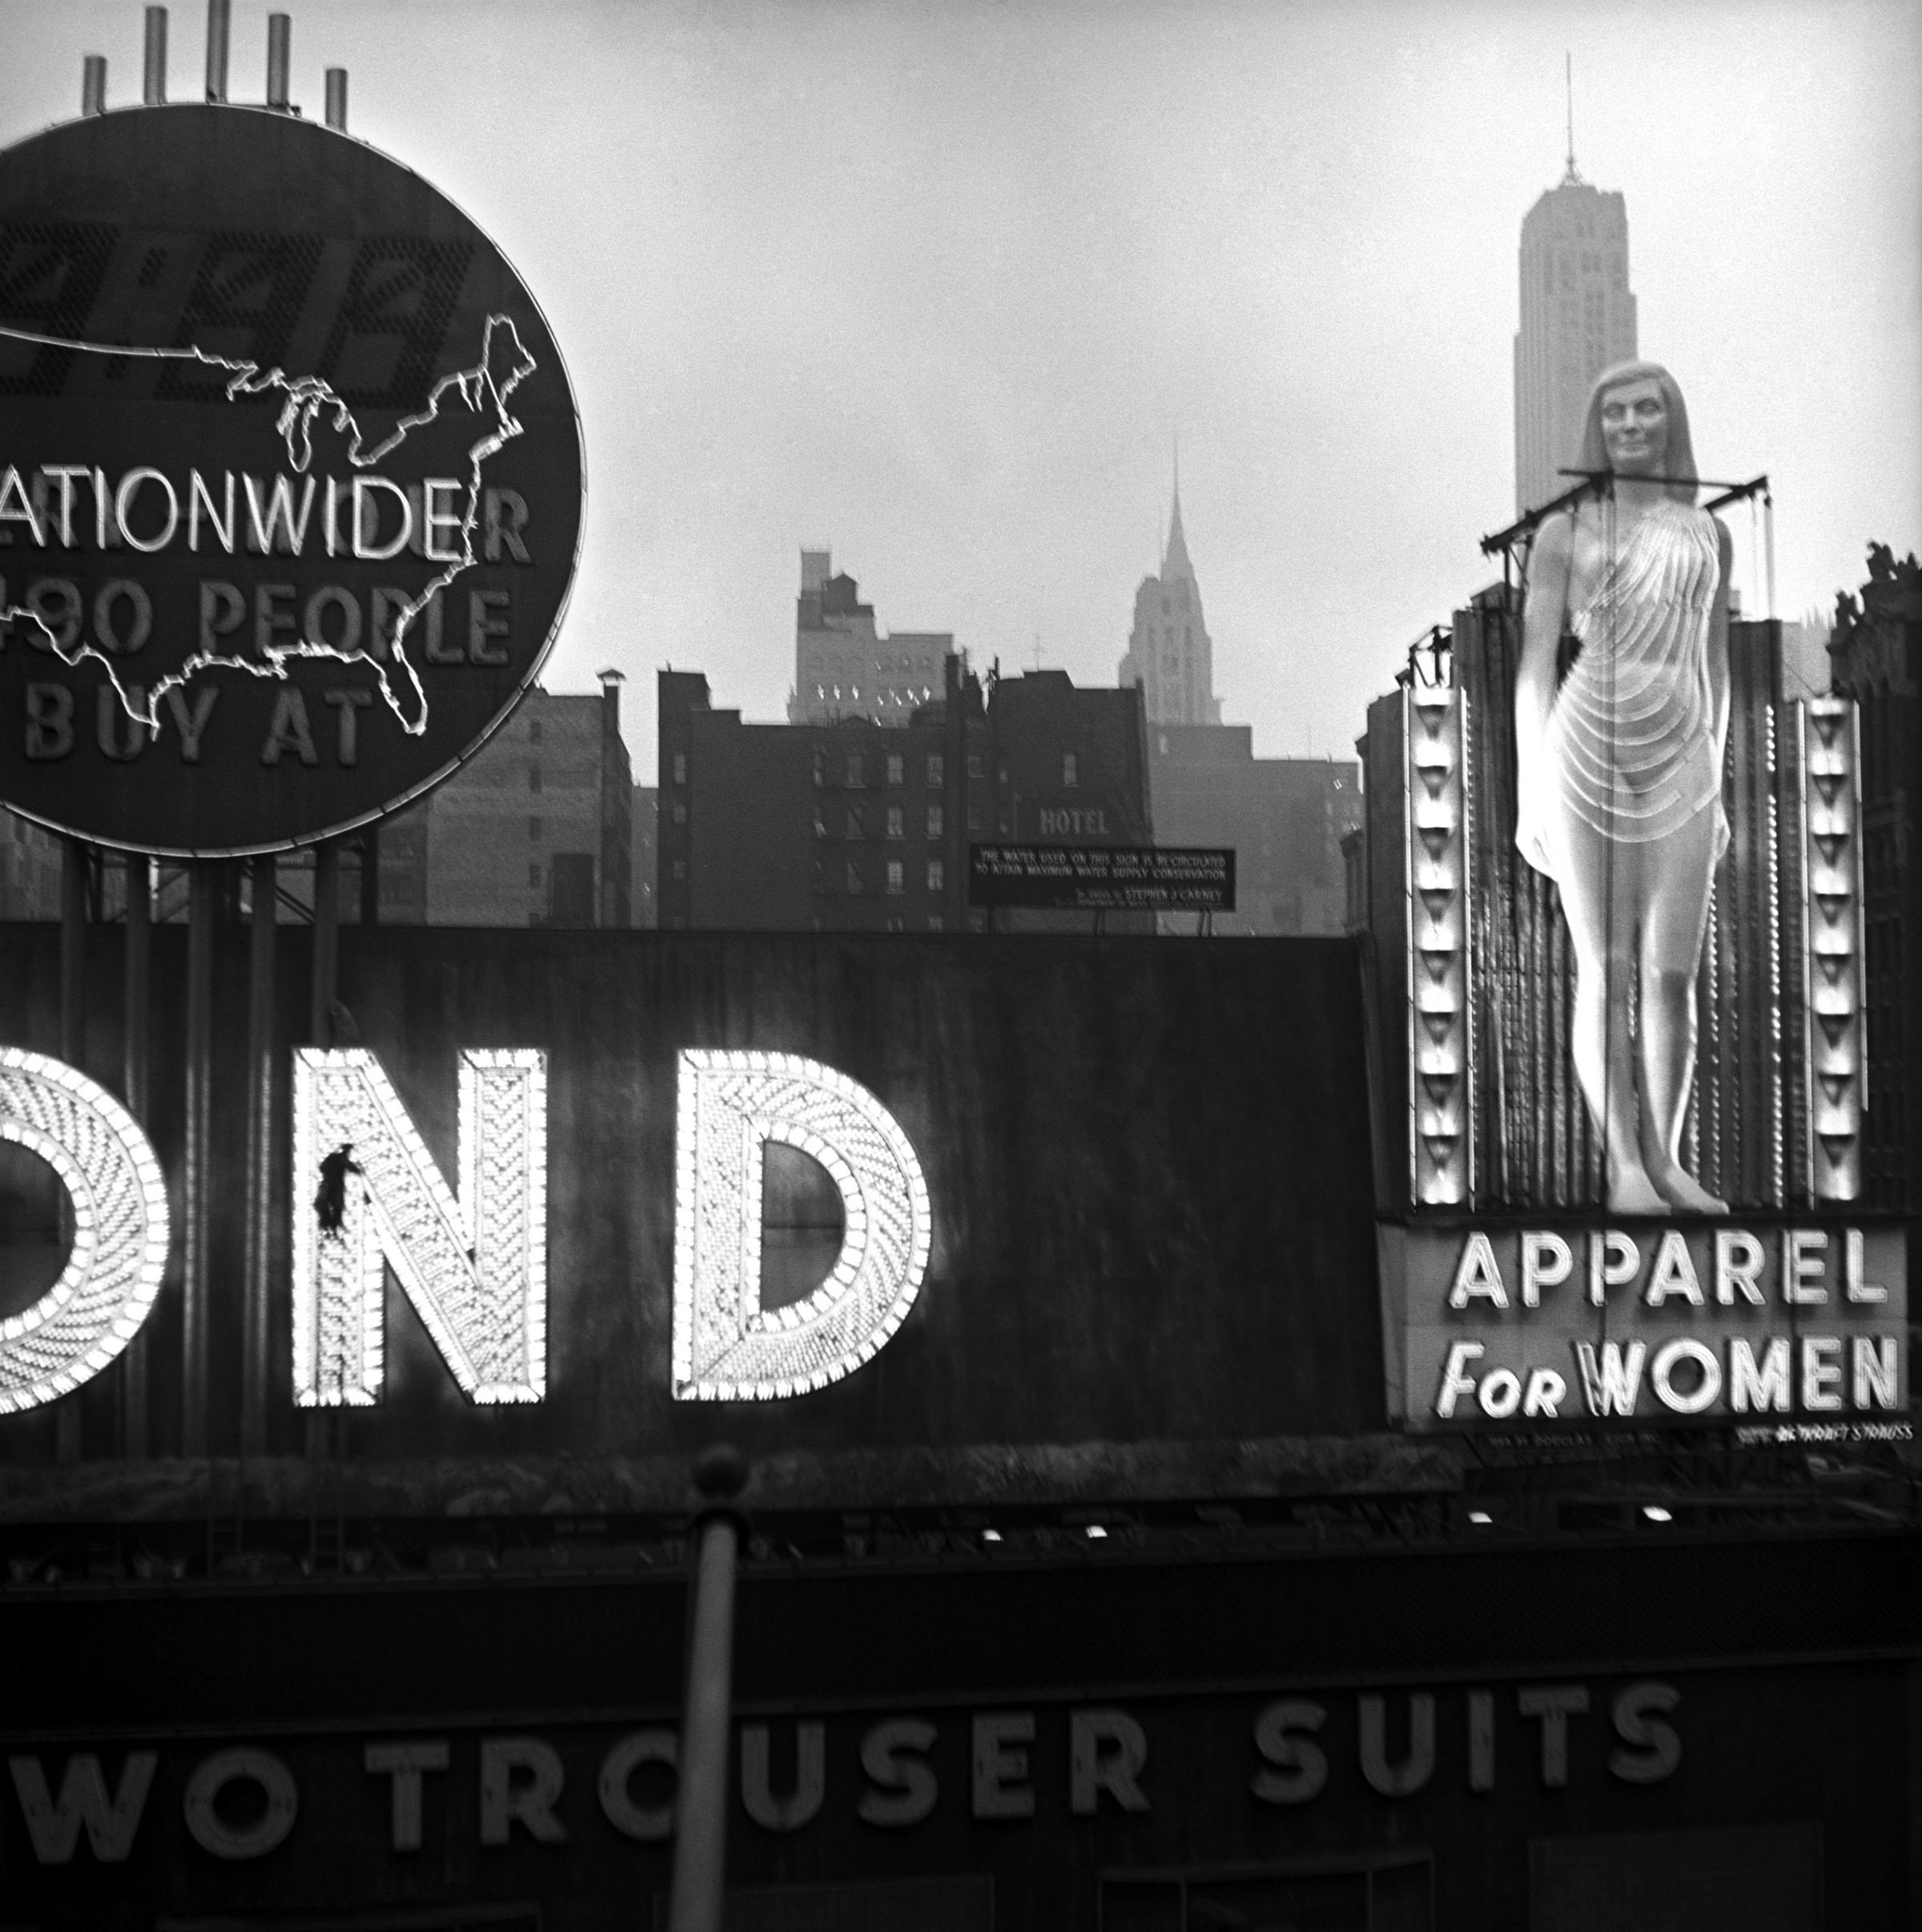 USA. New York City. Times Square. Clothing shop advertisment. 1950